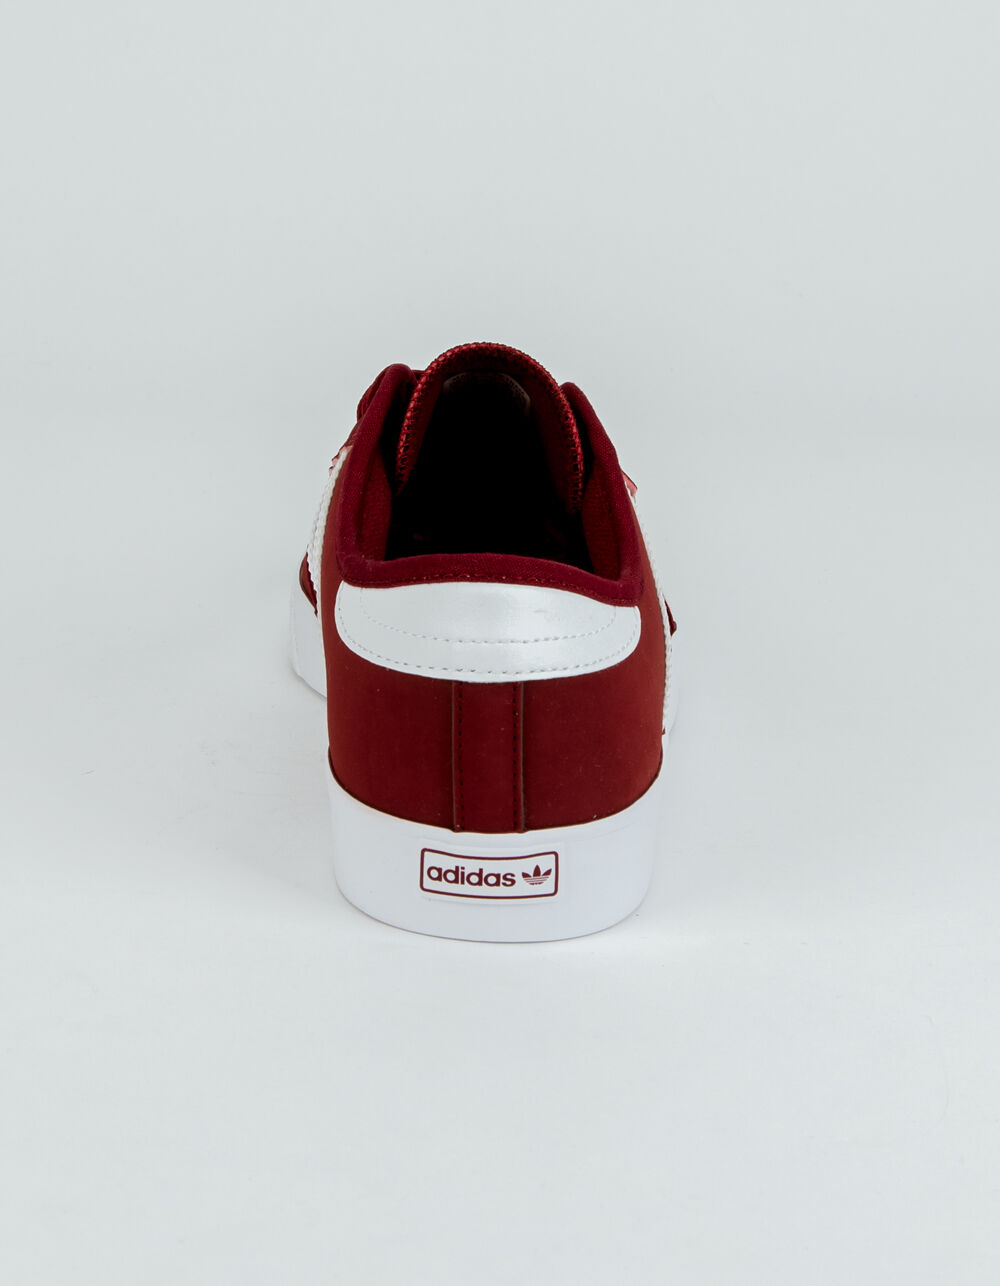 ADIDAS Seeley Collegiate Burgundy & Future White Shoes image number 4